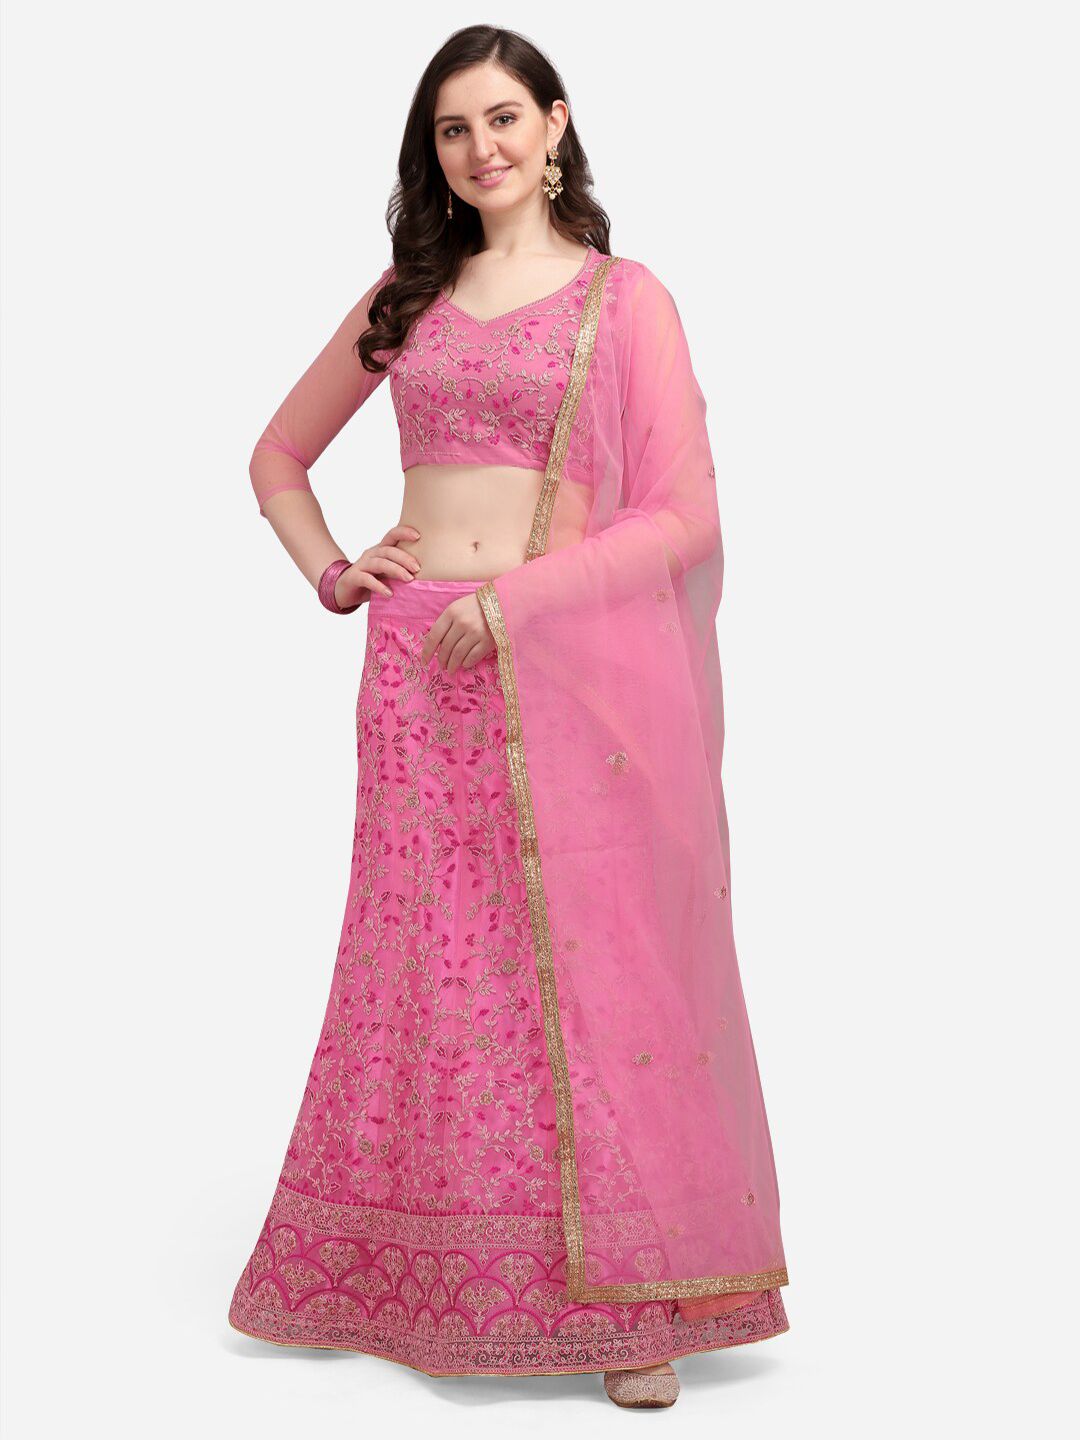 Satrani Pink & Silver-Toned Embroidered Semi-Stitched Lehenga & Blouse With Dupatta Price in India